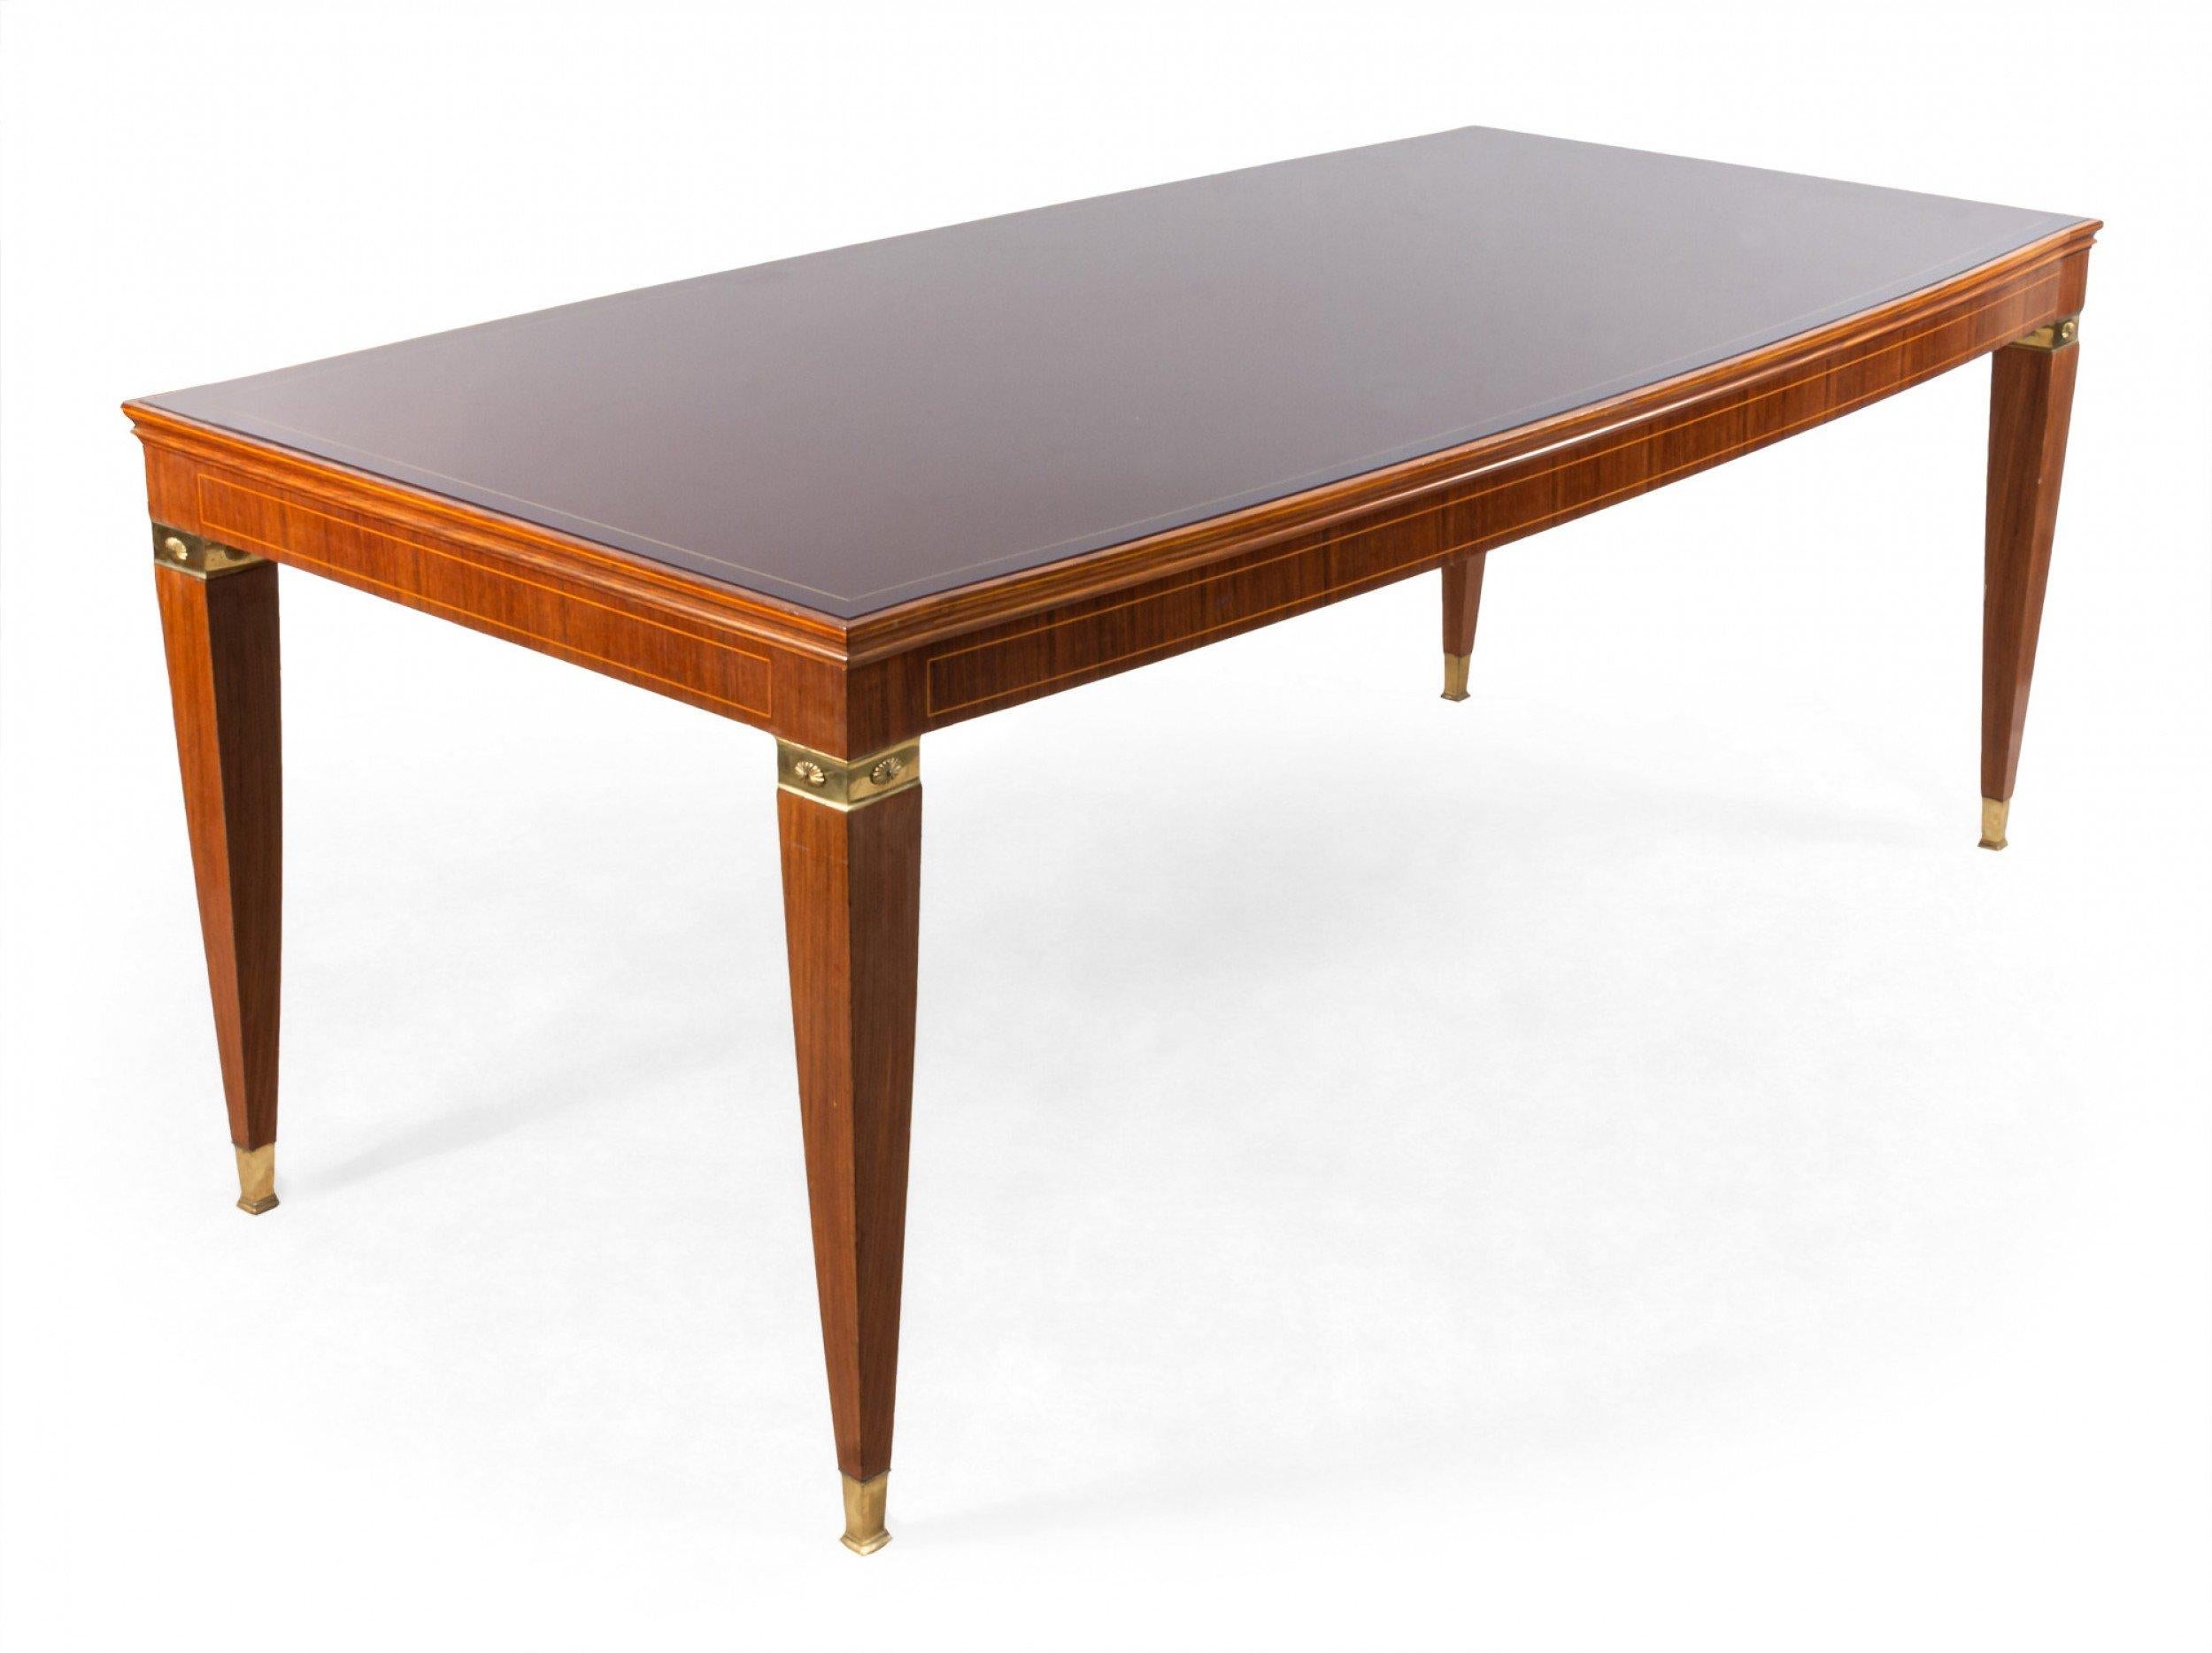 Italian midcentury dining table with wood construction, red glass top, and bronze mounted legs. (Attributed to PAULO BUFFA for ARRIGHI).